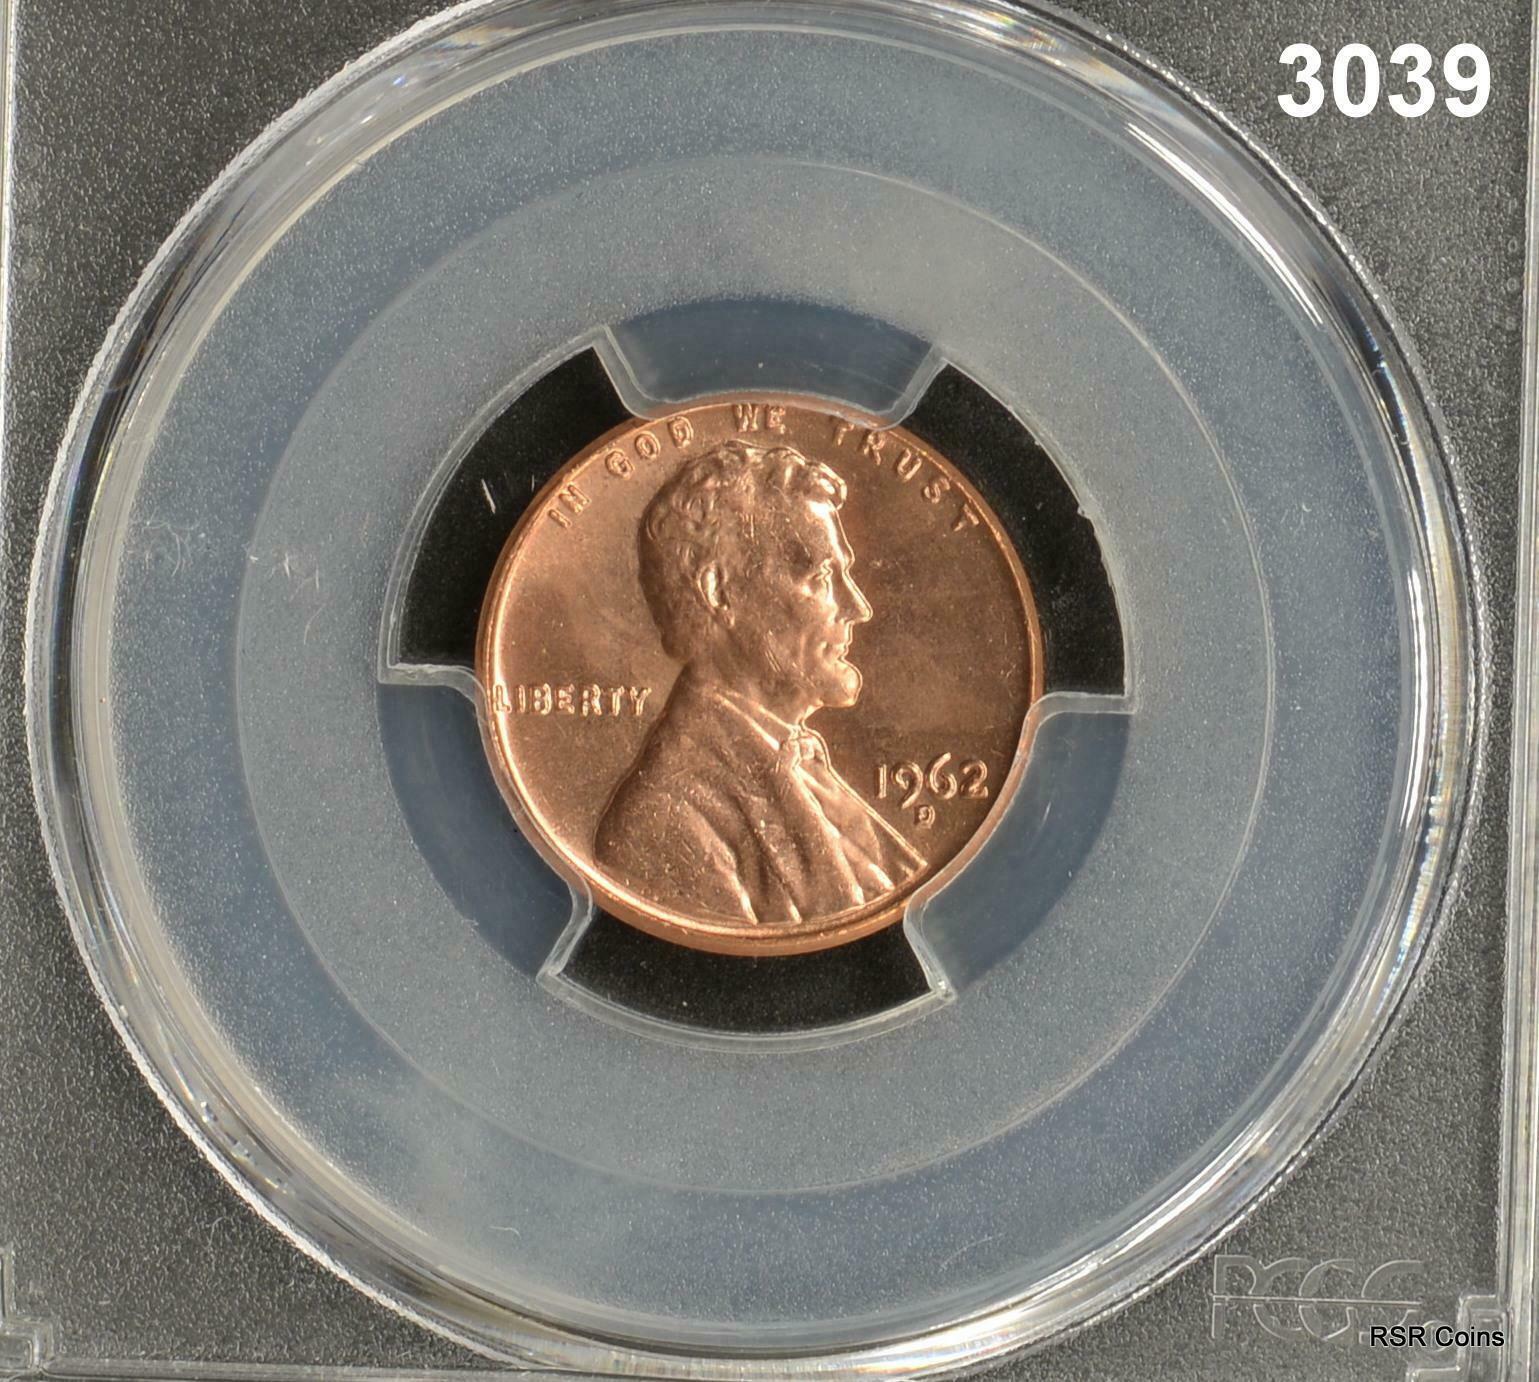 1962 D PCGS CERTIFIED MS 66 RD LINCOLN WHEAT PENNY! FLASHY LUSTER #3039